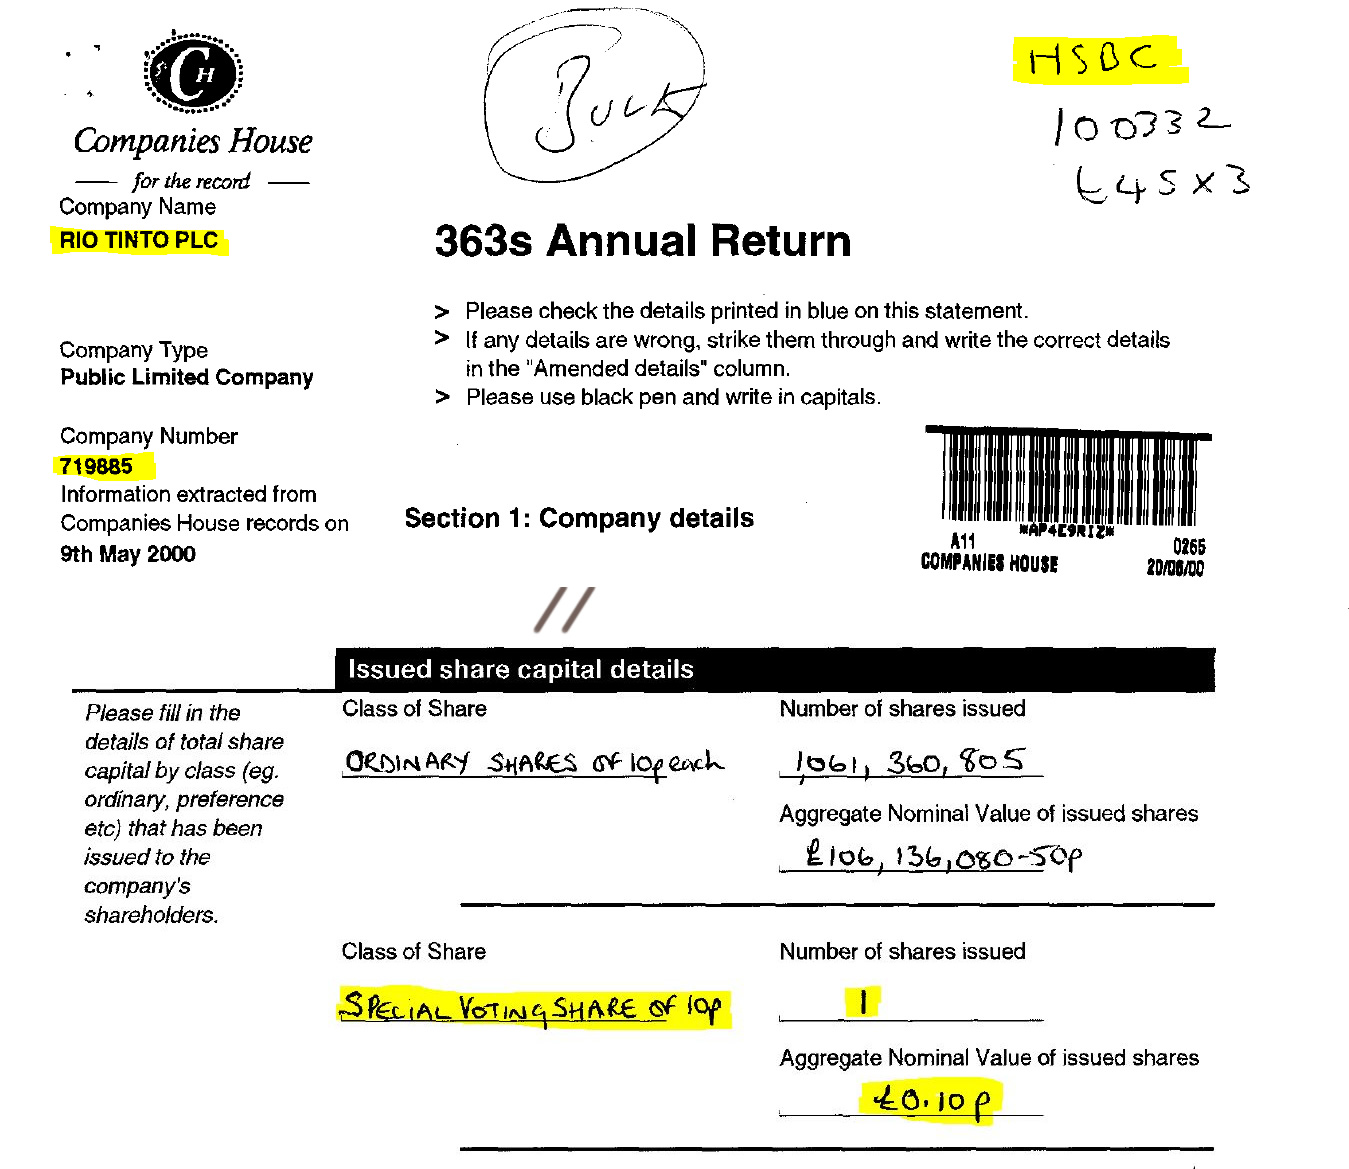 Rio Tinto PLC. (Dec. 31, 1999). 2000 Annual Return, Reg. No. 719885. Companies House. Take special note that it appears that HSBC is handling Rio Tinto’s corporate filings.